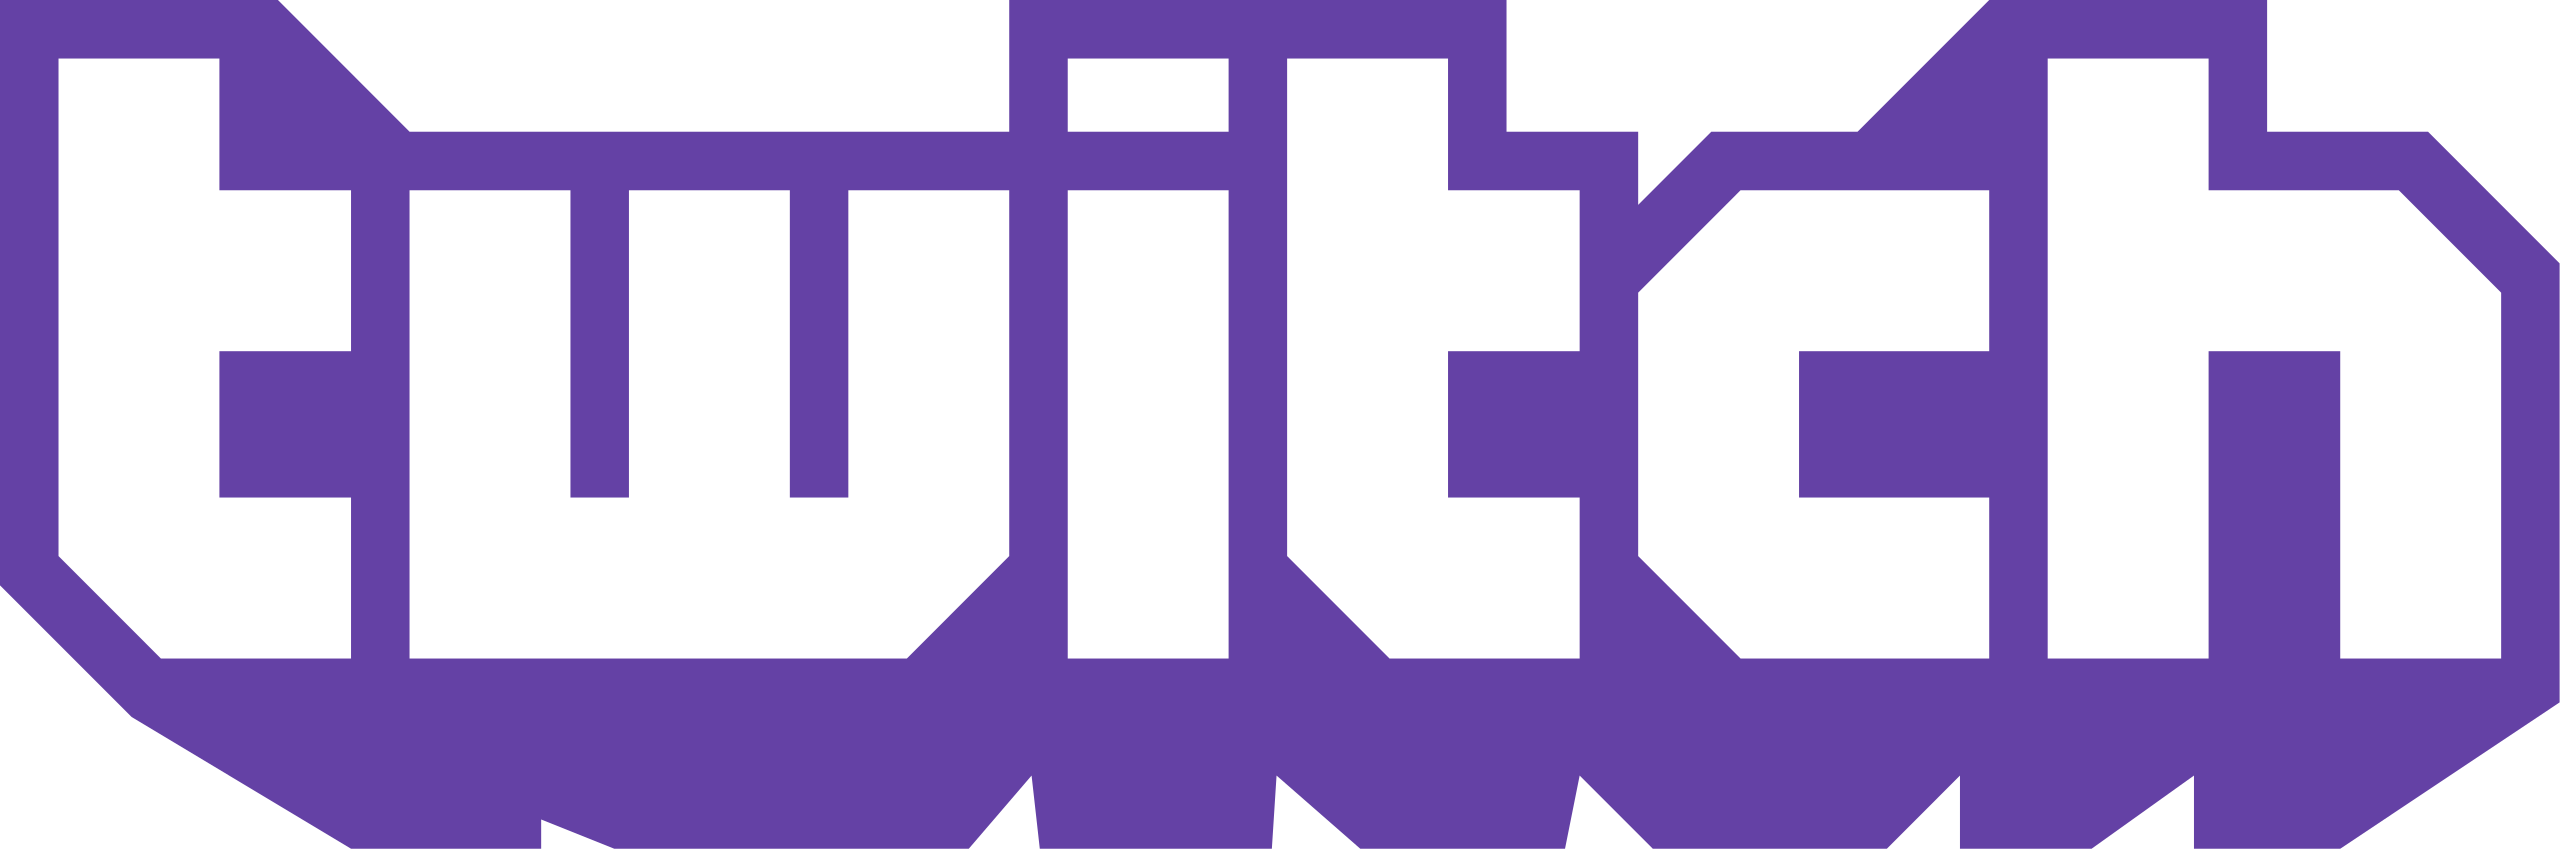 File:Twitch logo (wordmark only).svg - Wikimedia Commons